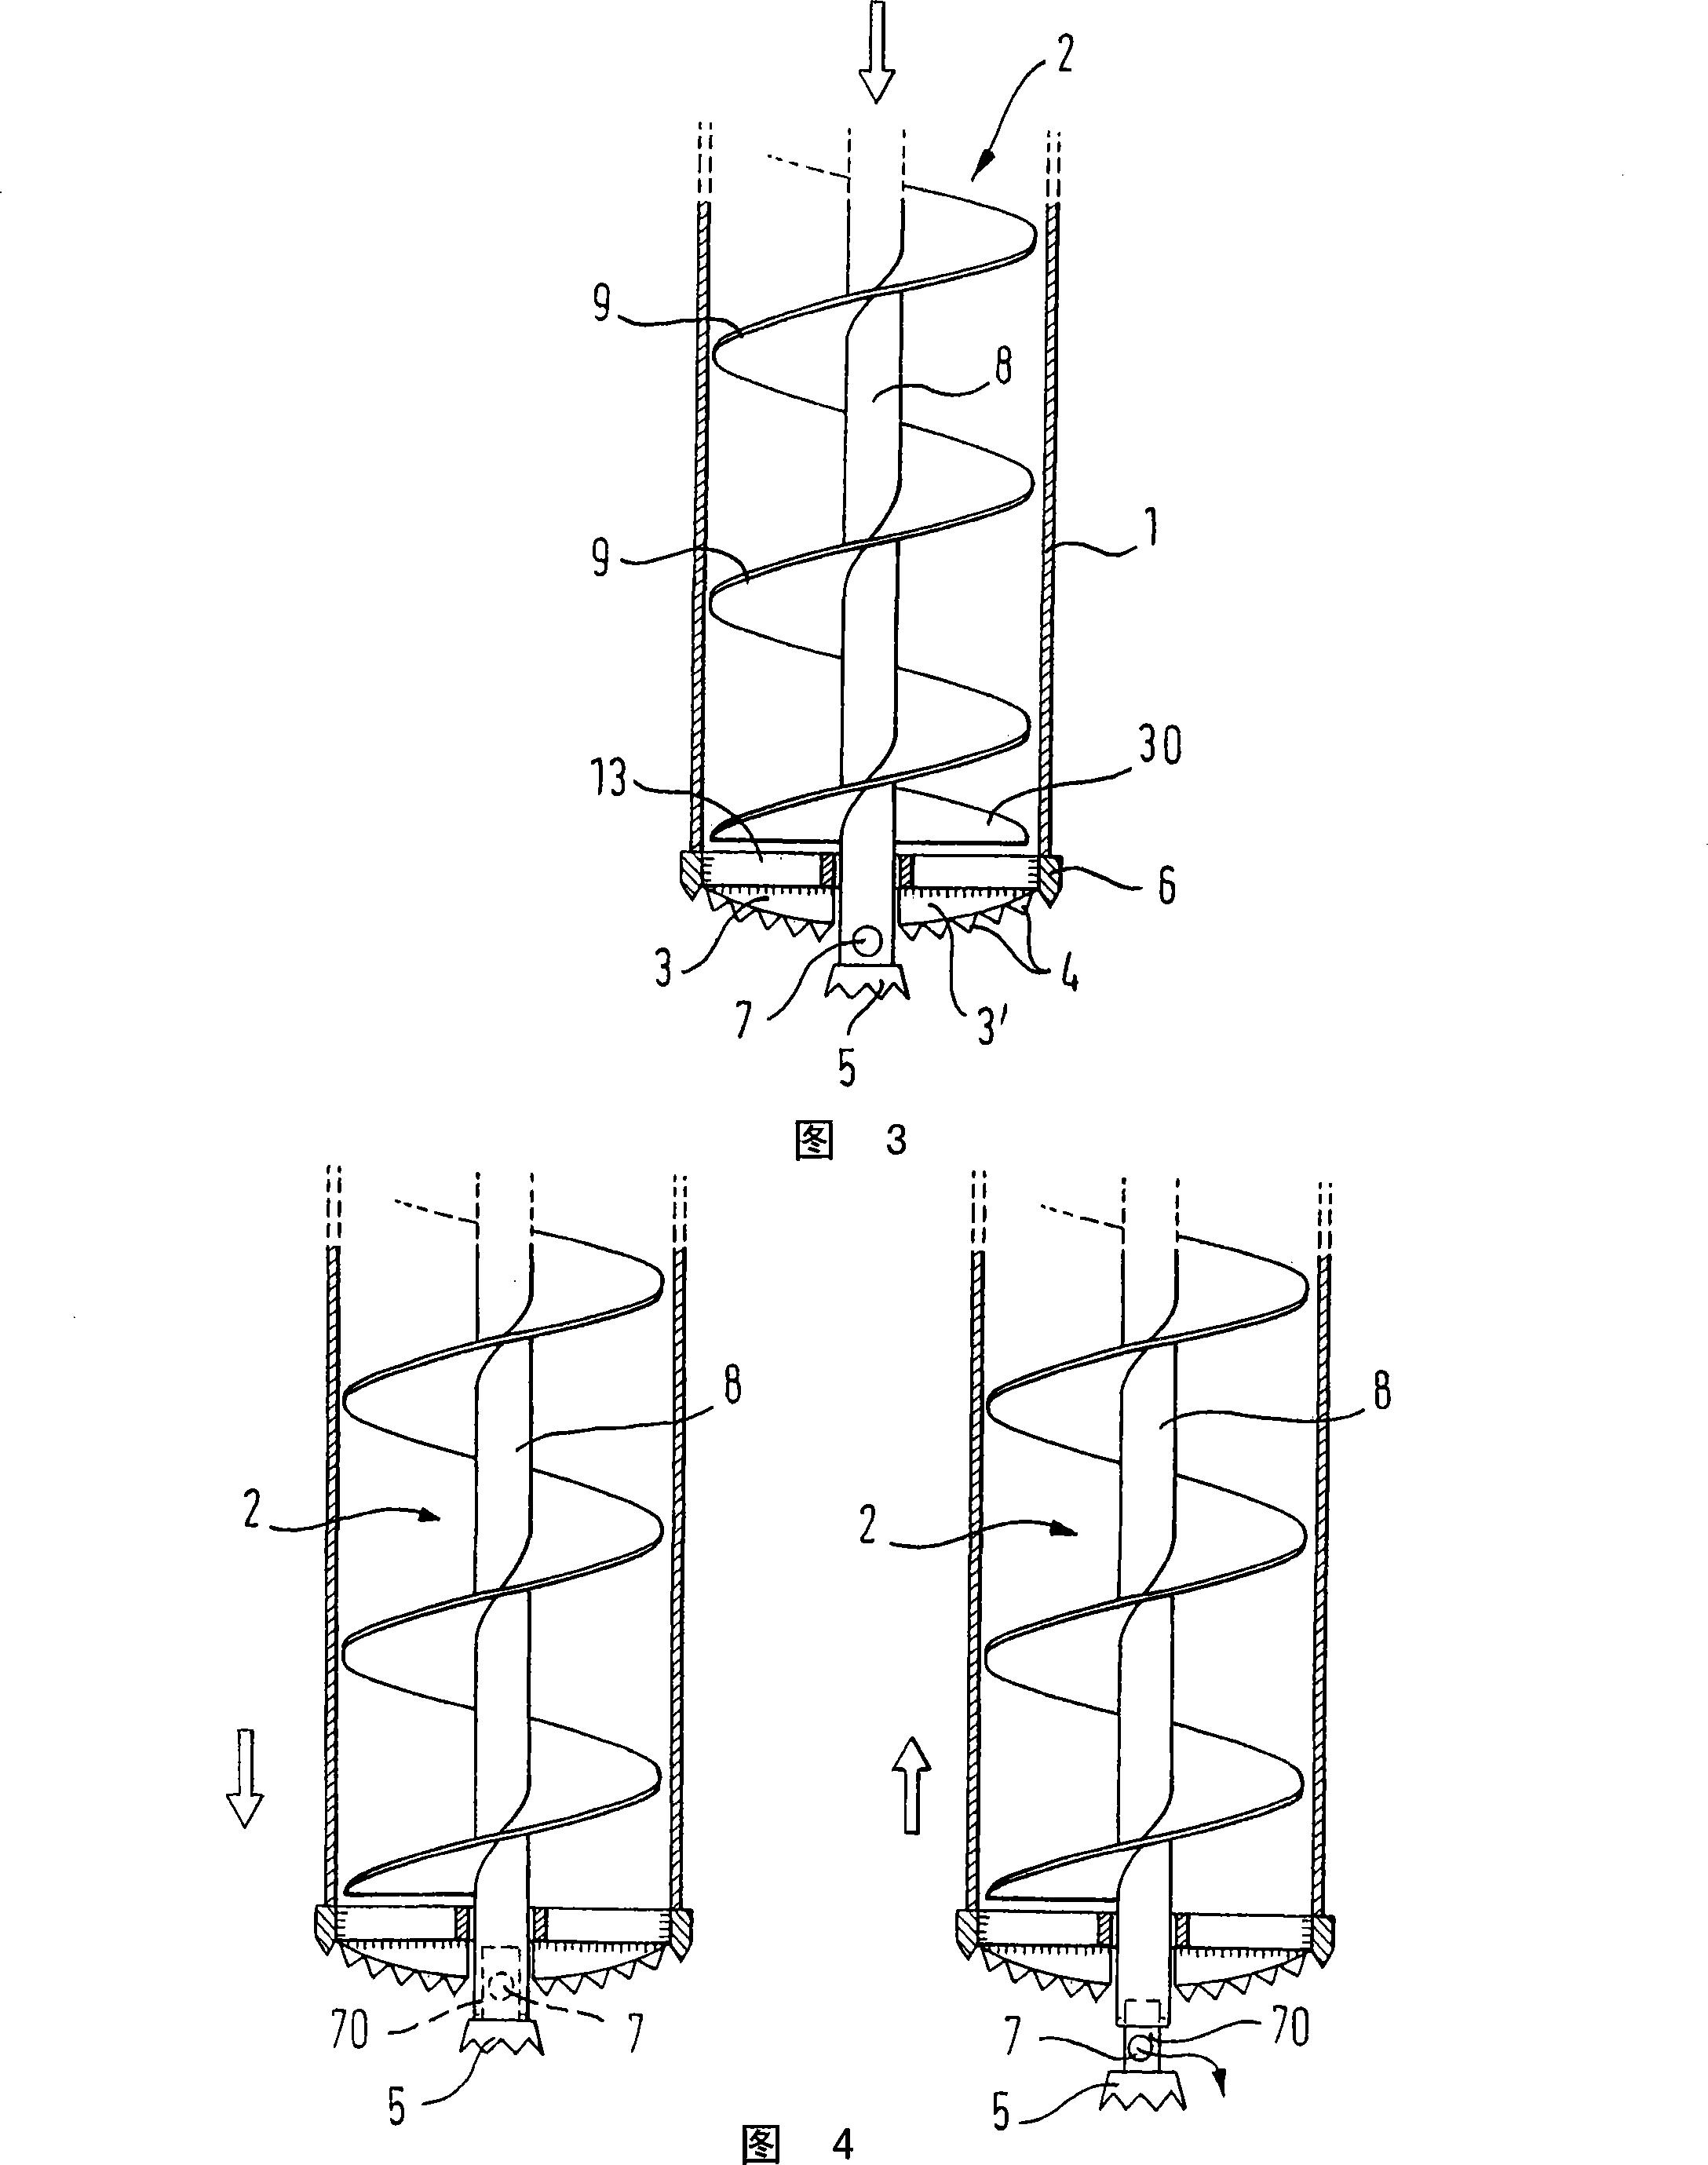 Method and apparatus for creating a borehole in the ground